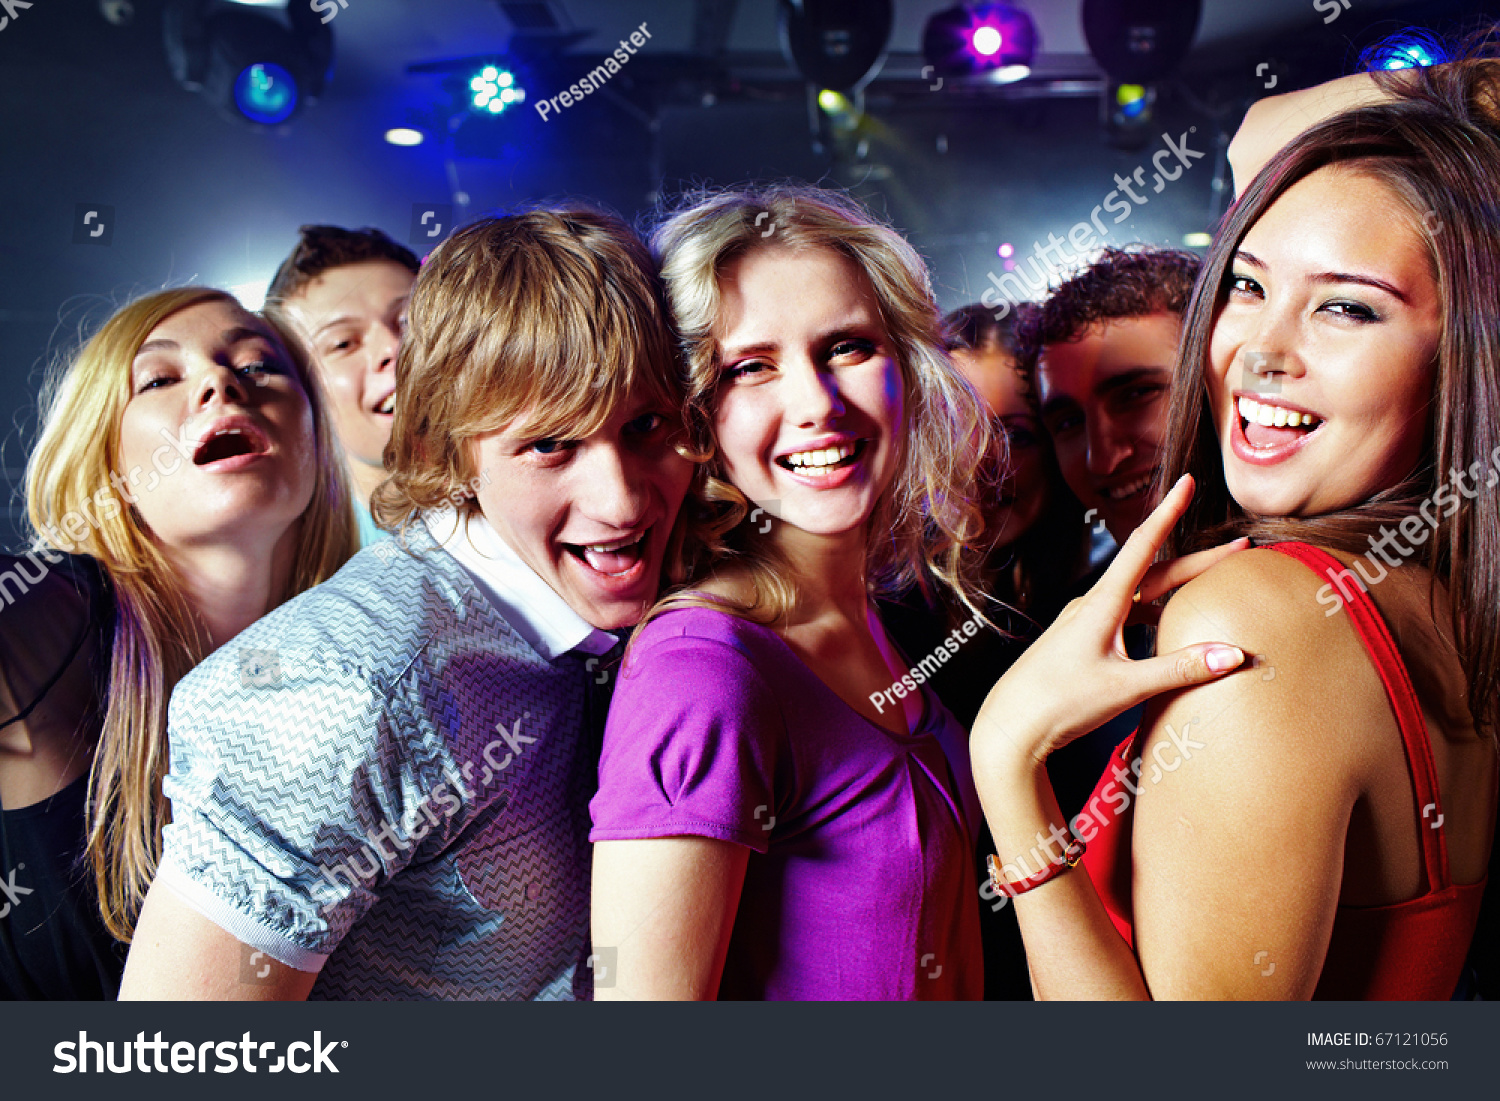 Image Of Clubbing Friends Looking At Camera During Party Stock Photo ...